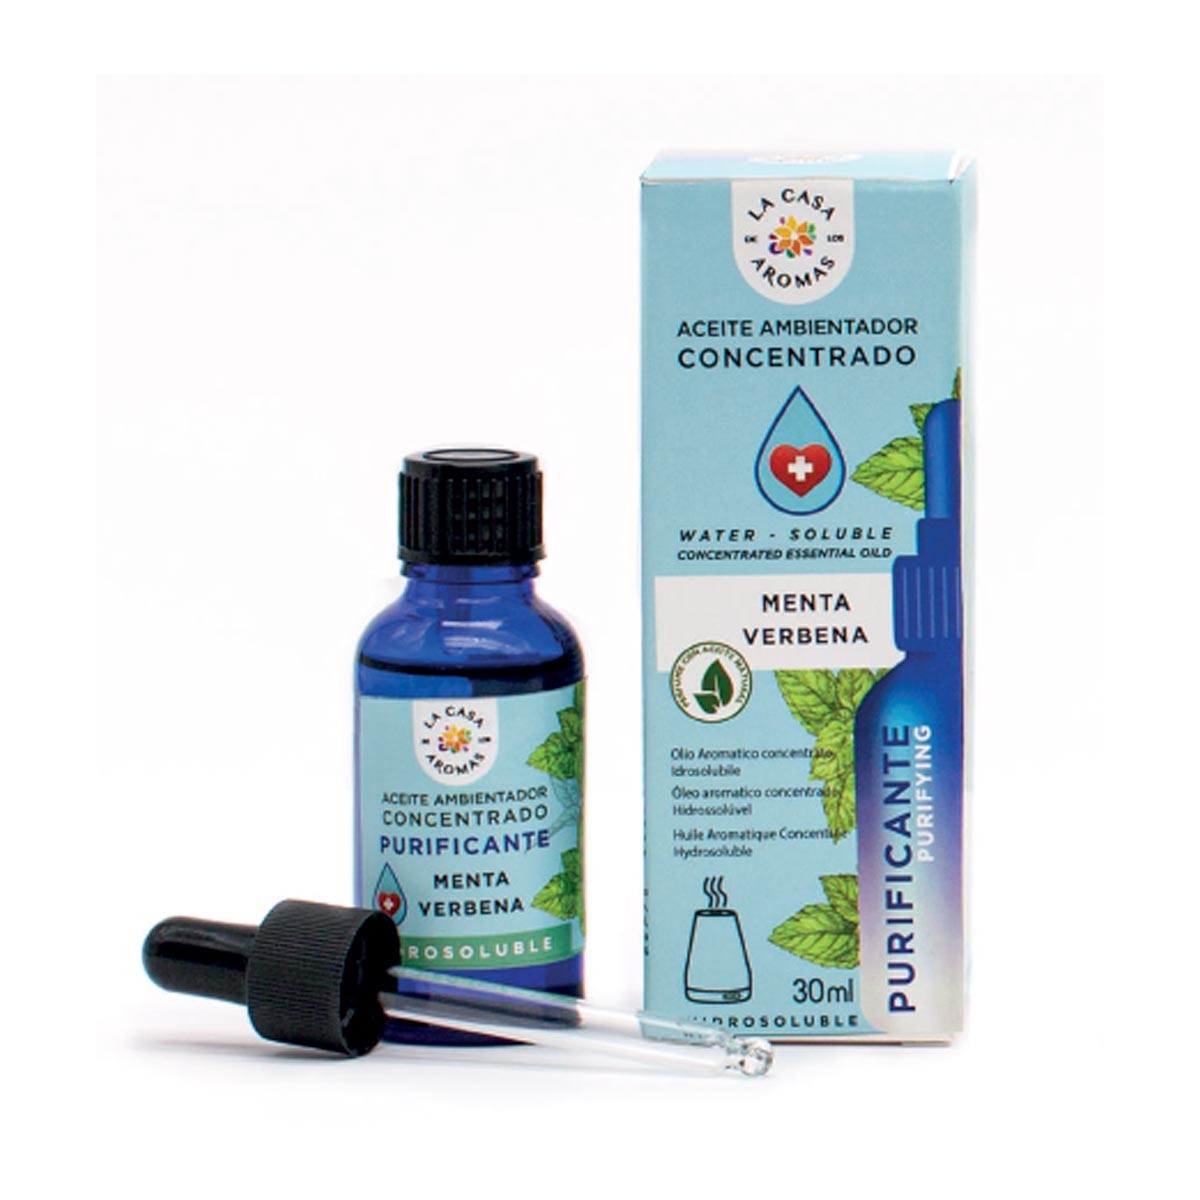 Purifying water-soluble oil...